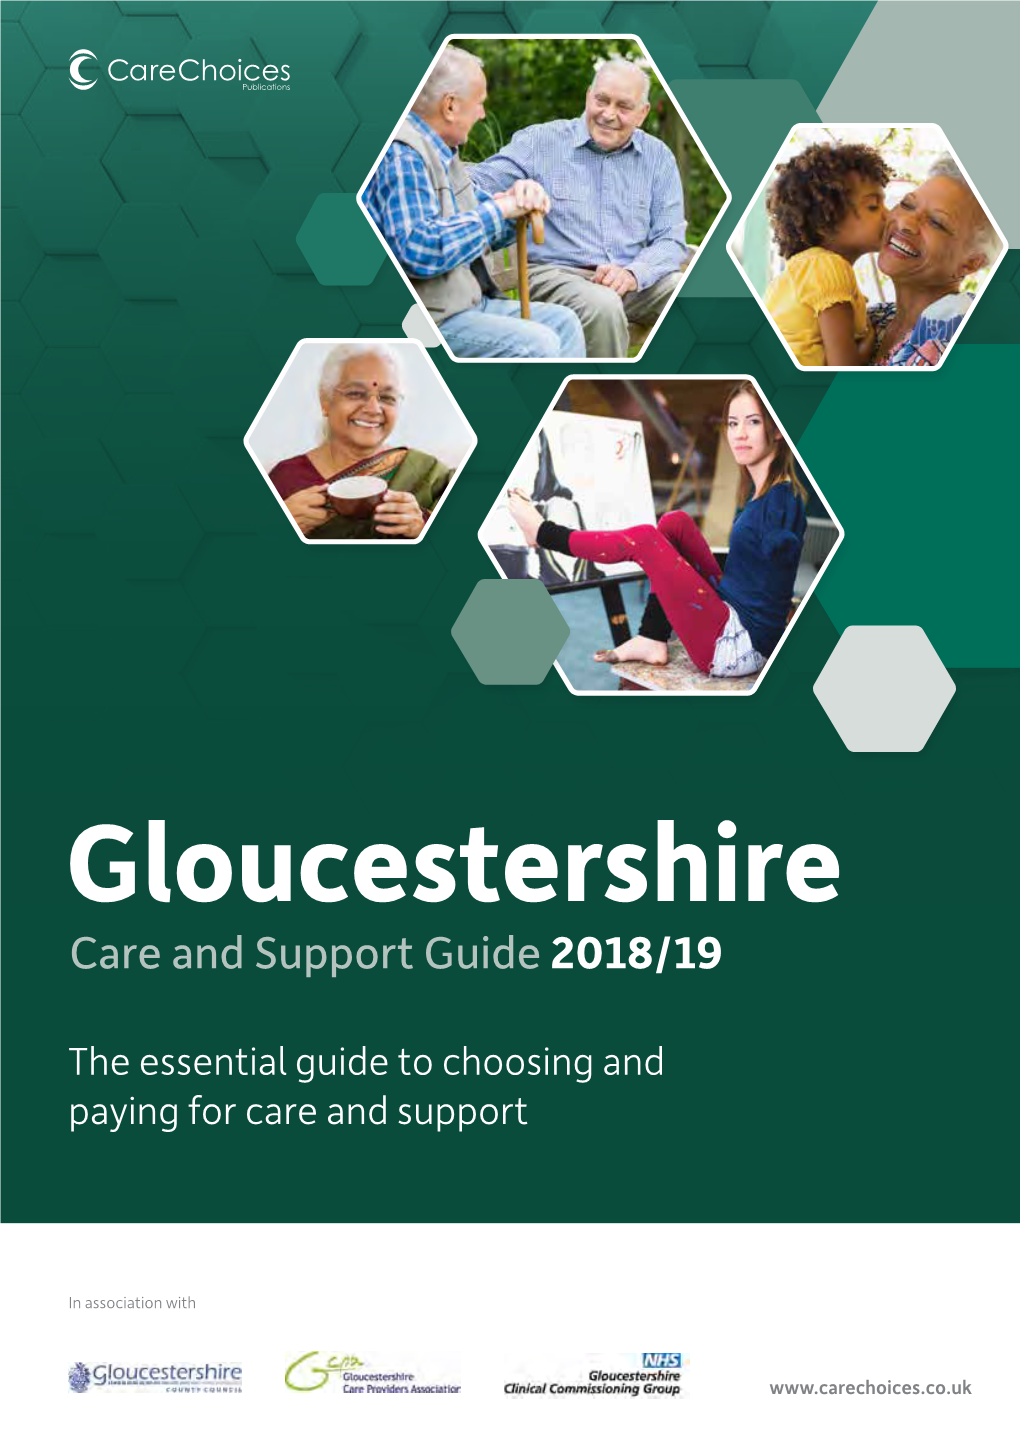 Care and Support Guide 2018/19